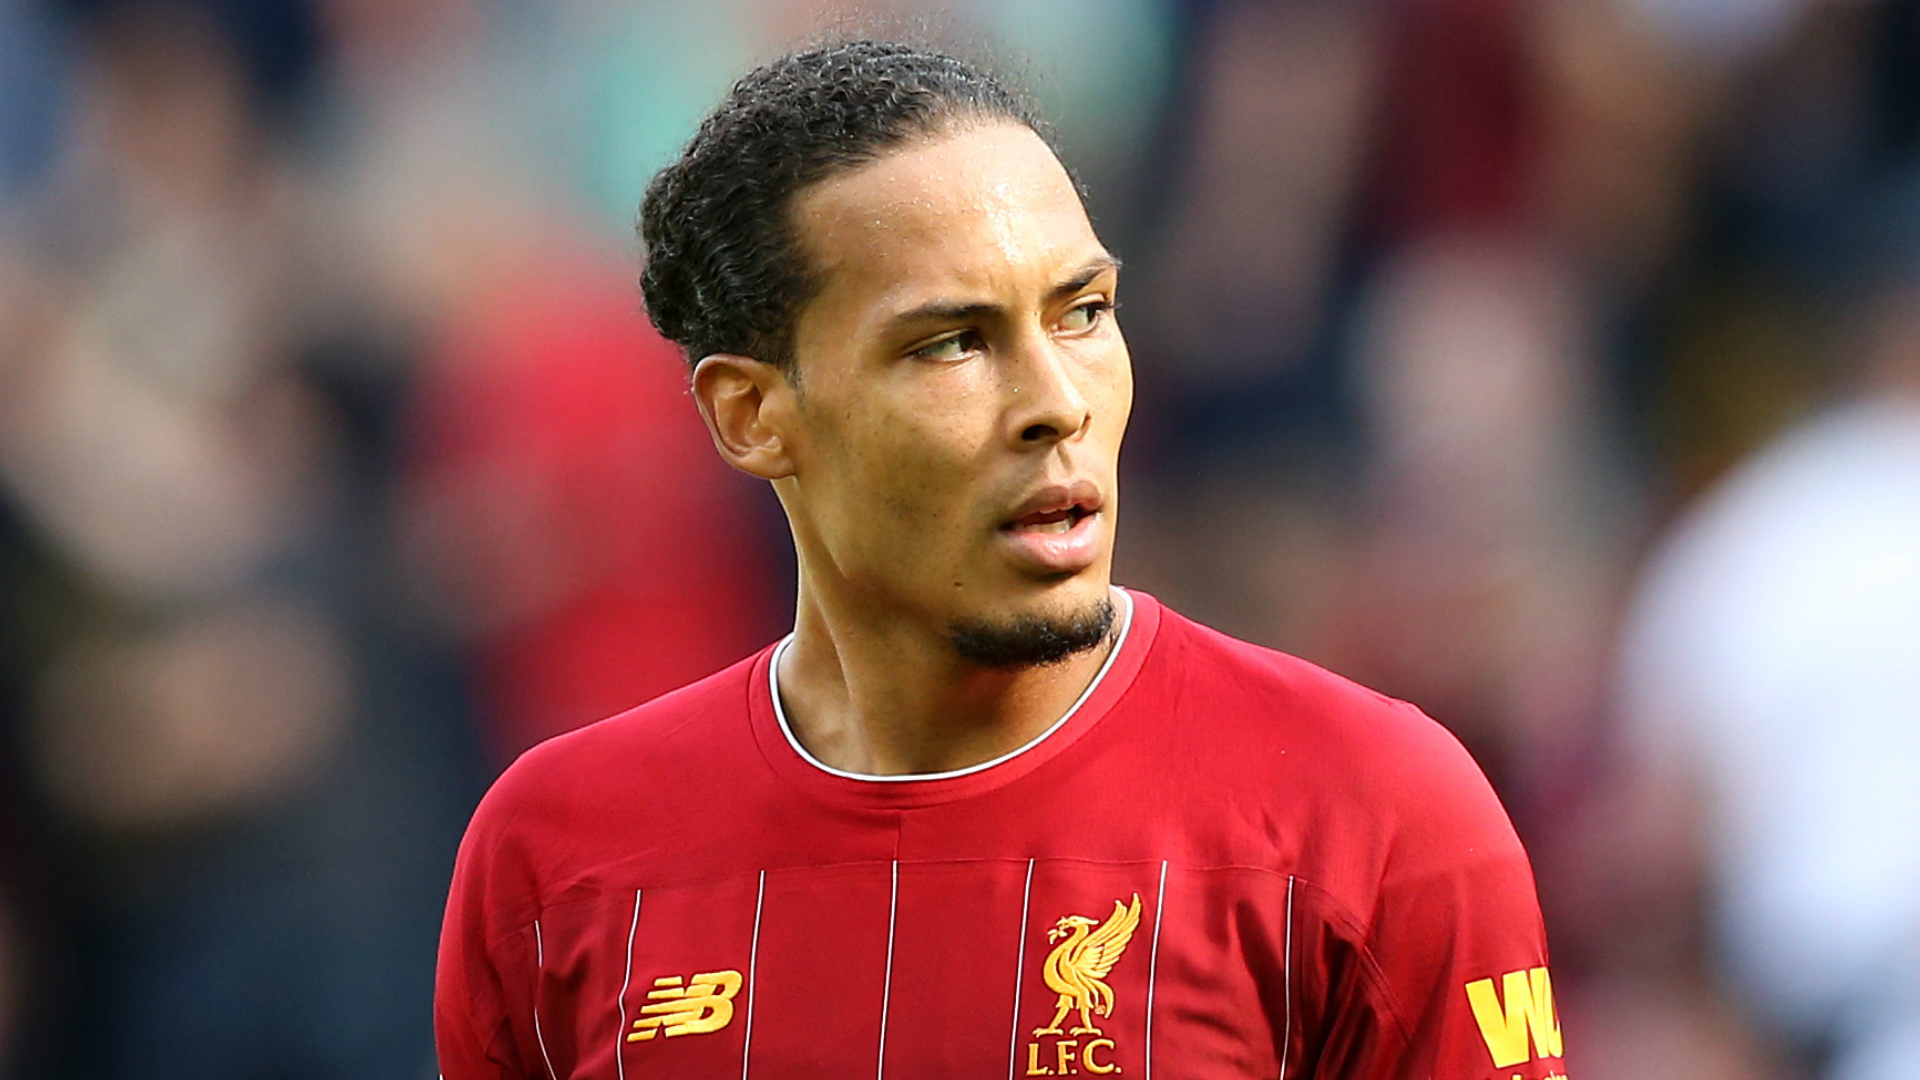 Champions League games and the fixtures that decide the title are more significant than visiting Old Trafford, according to Virgil van Dijk.